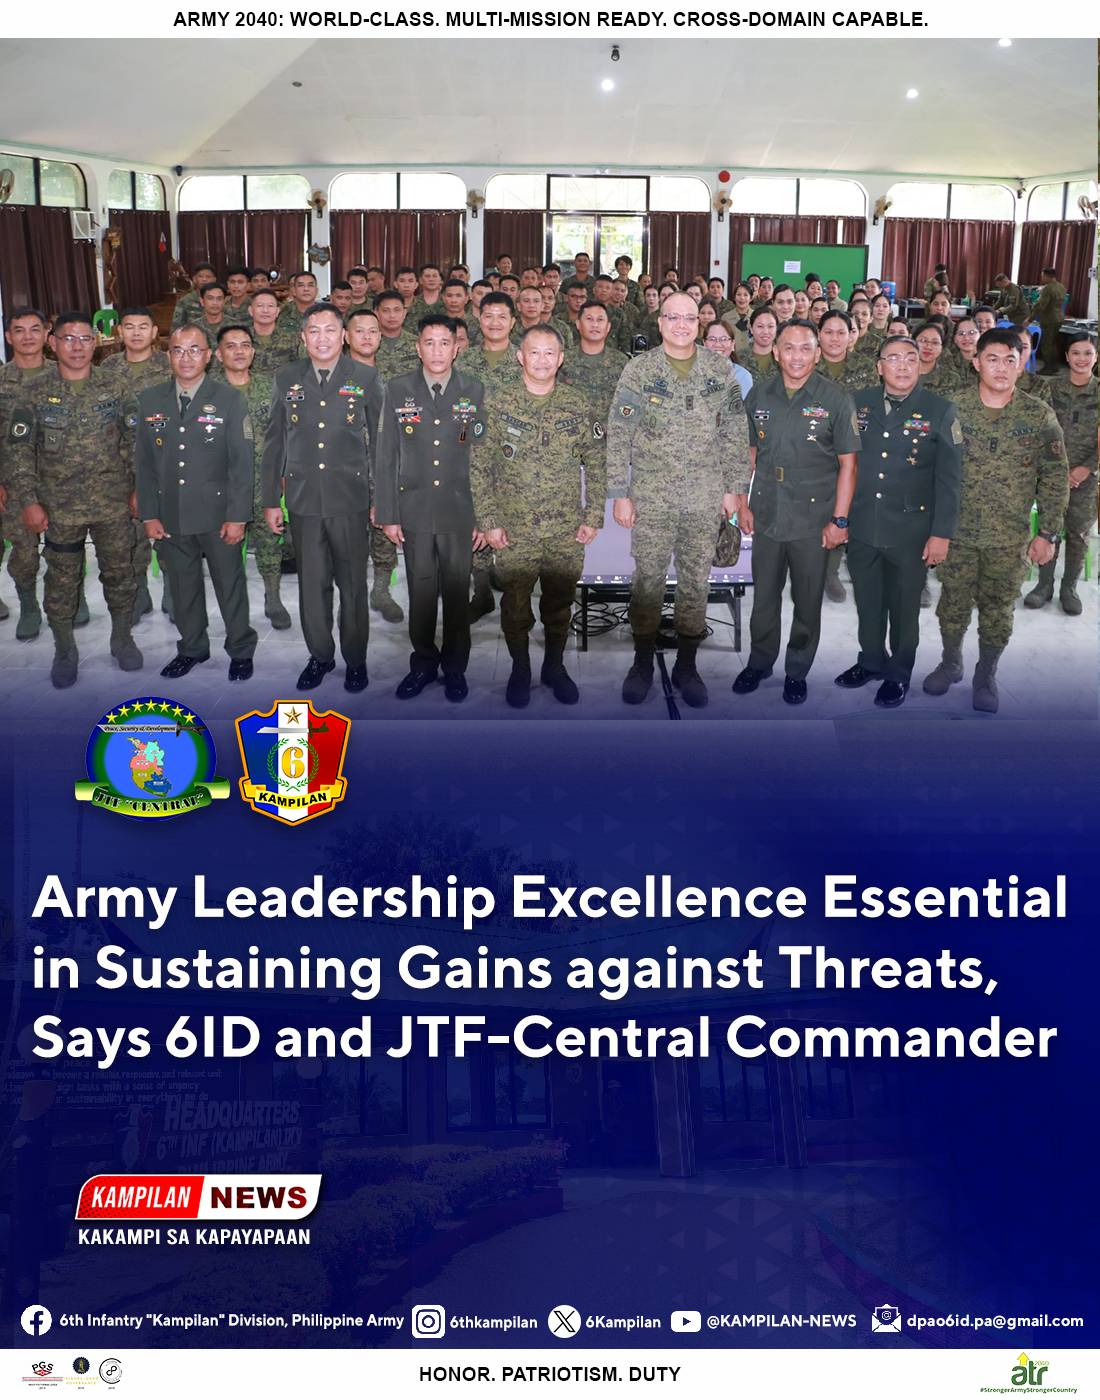 Army Leadership Excellence Essential in Sustaining Gains against Threats, Says 6ID and JTF-Central commander